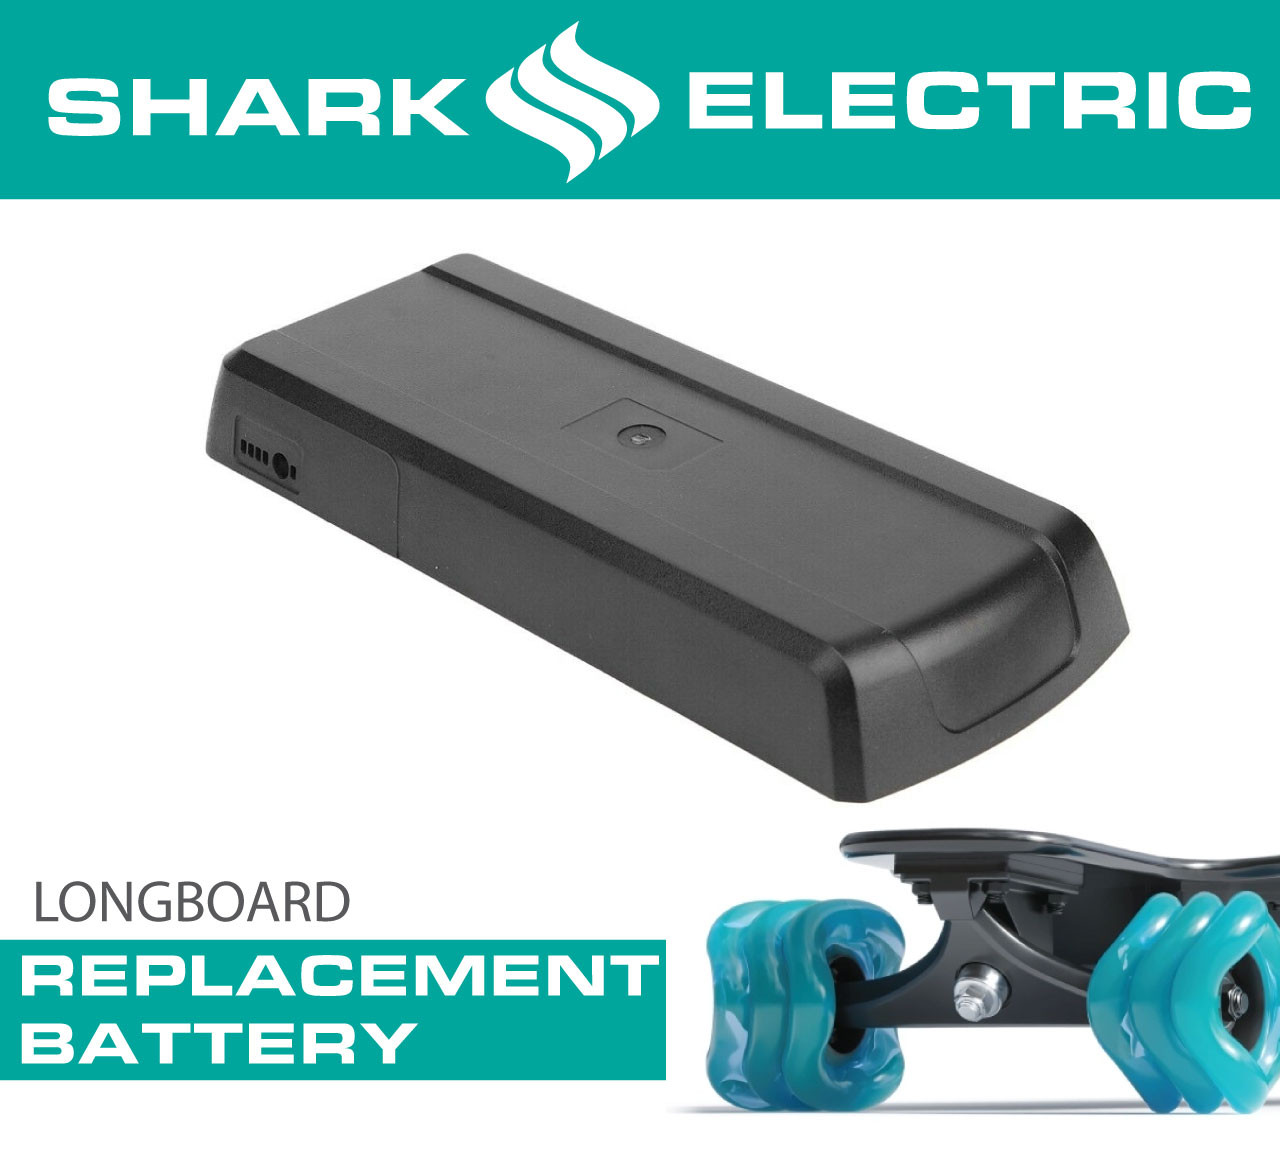 Battery Replacement for Shark Electric Recharge Longboard